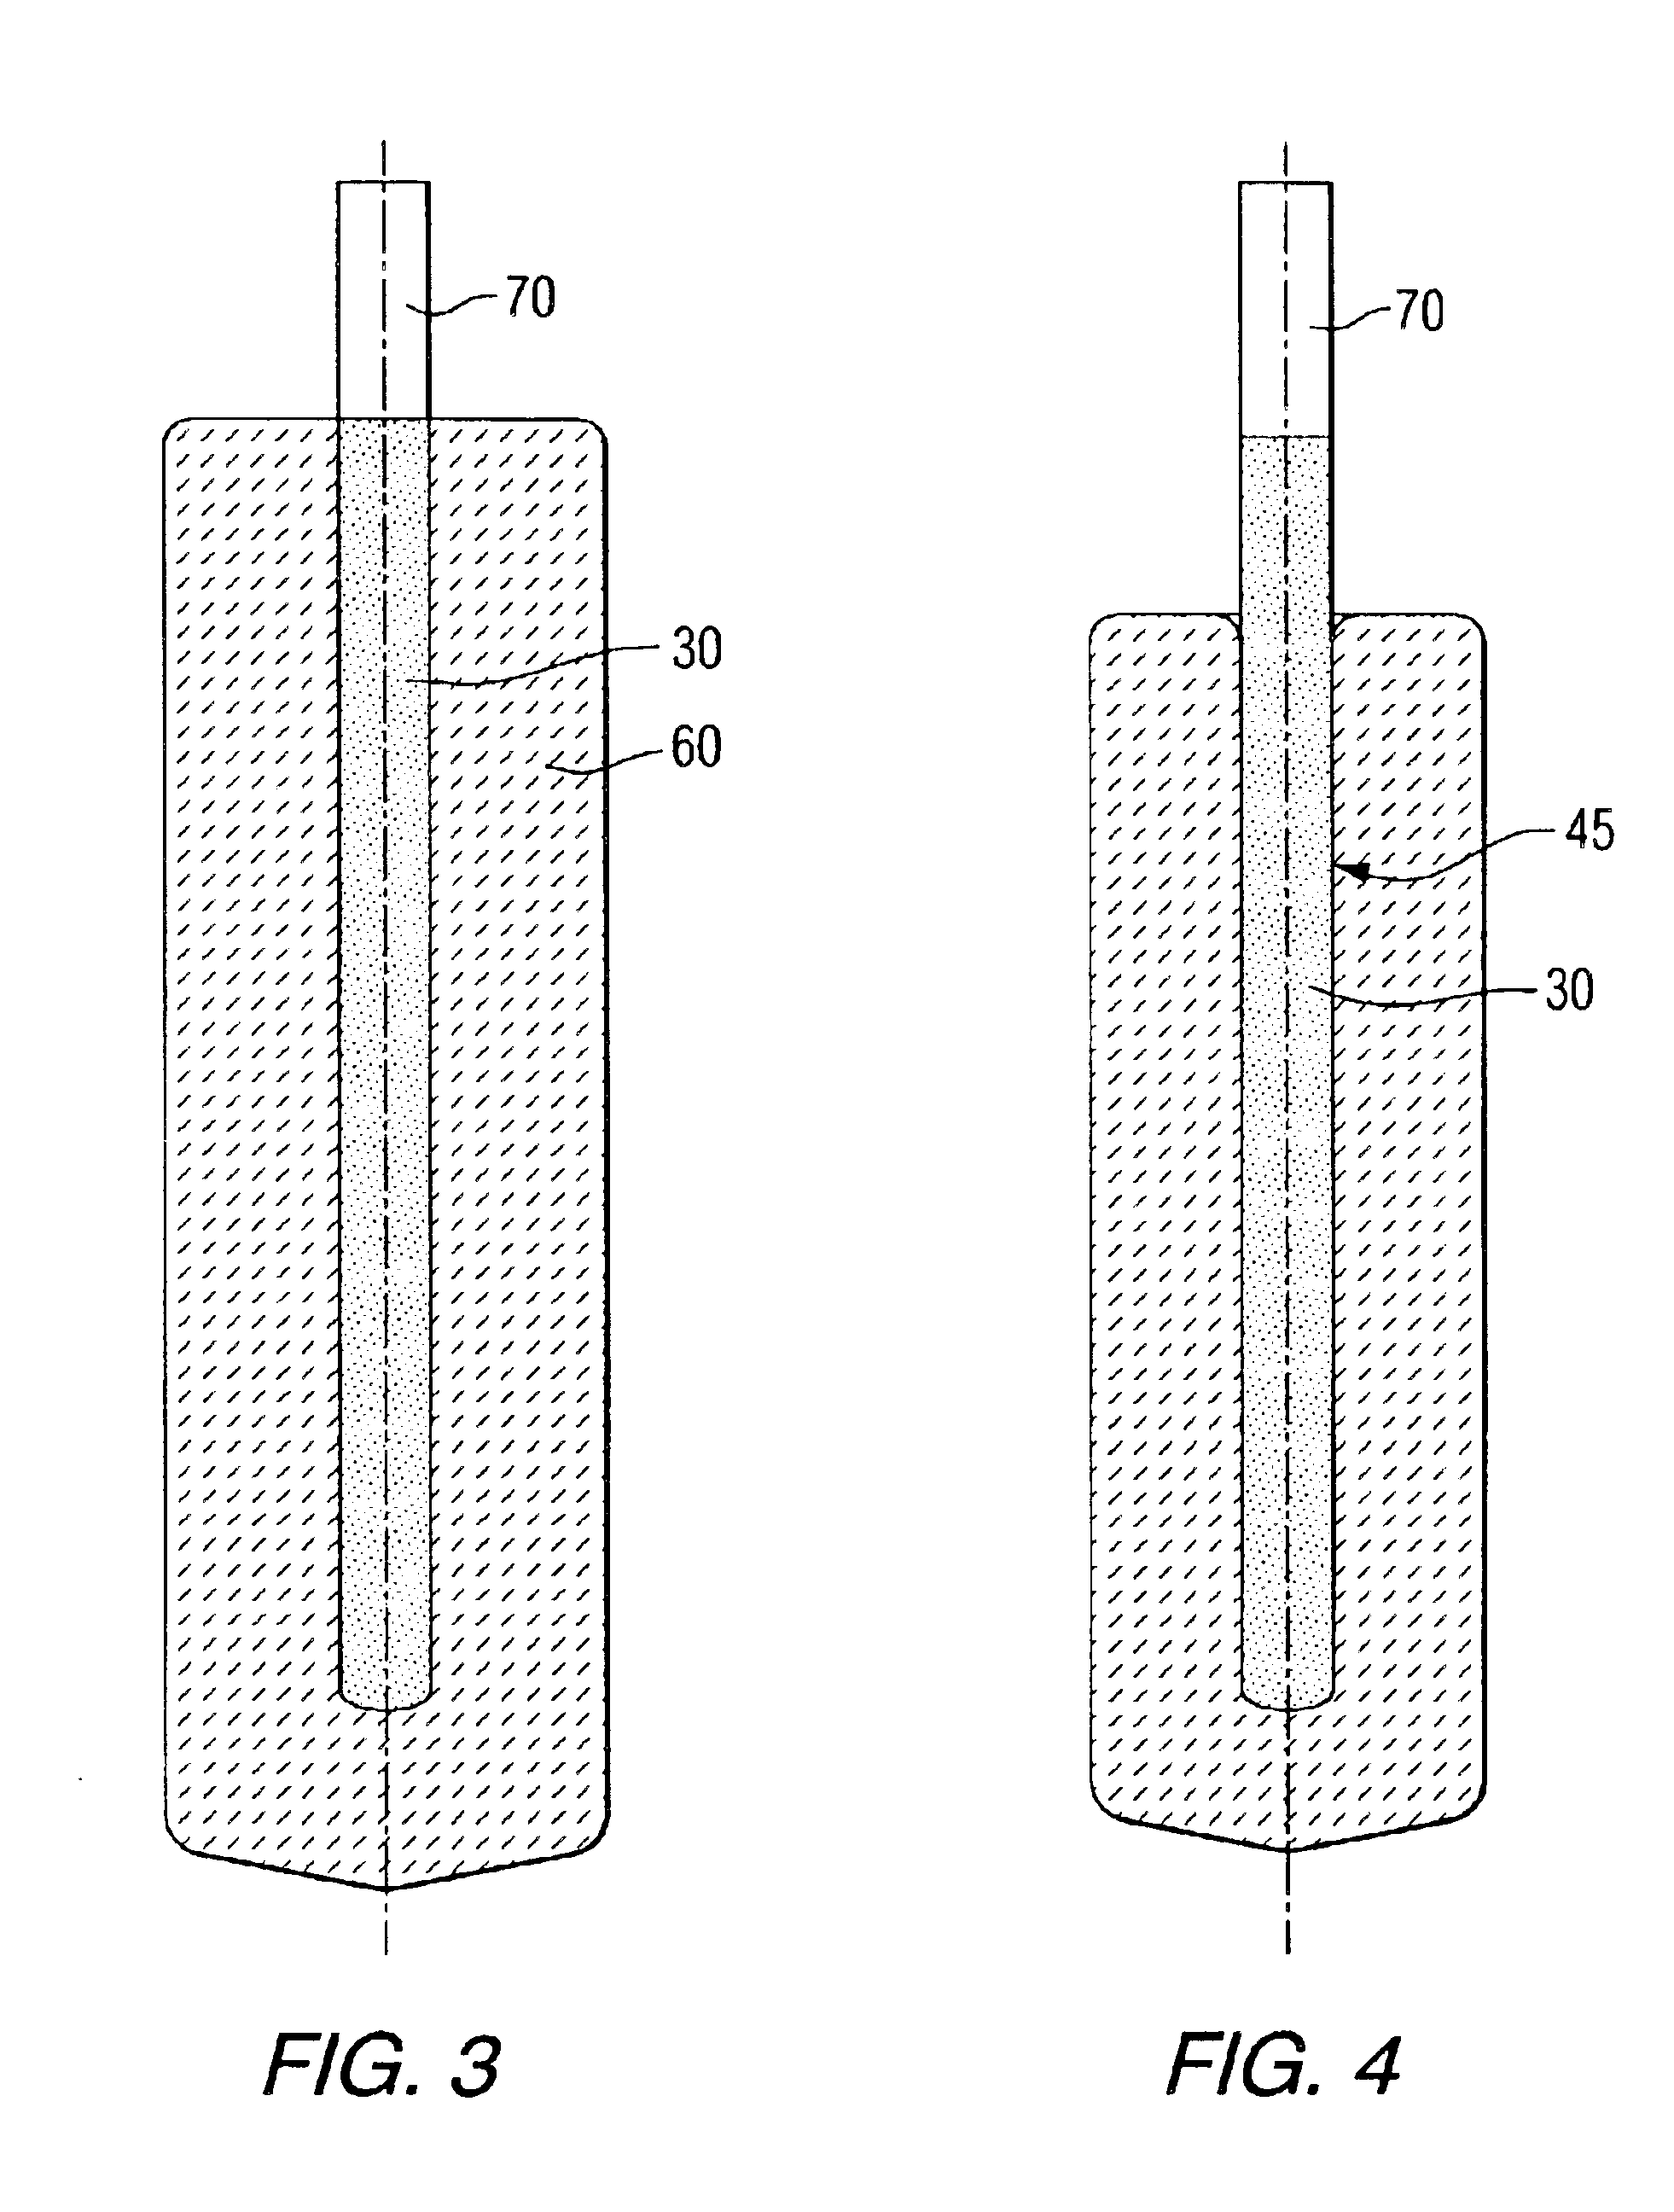 Sinter-bonded direct pin connections for inert anodes